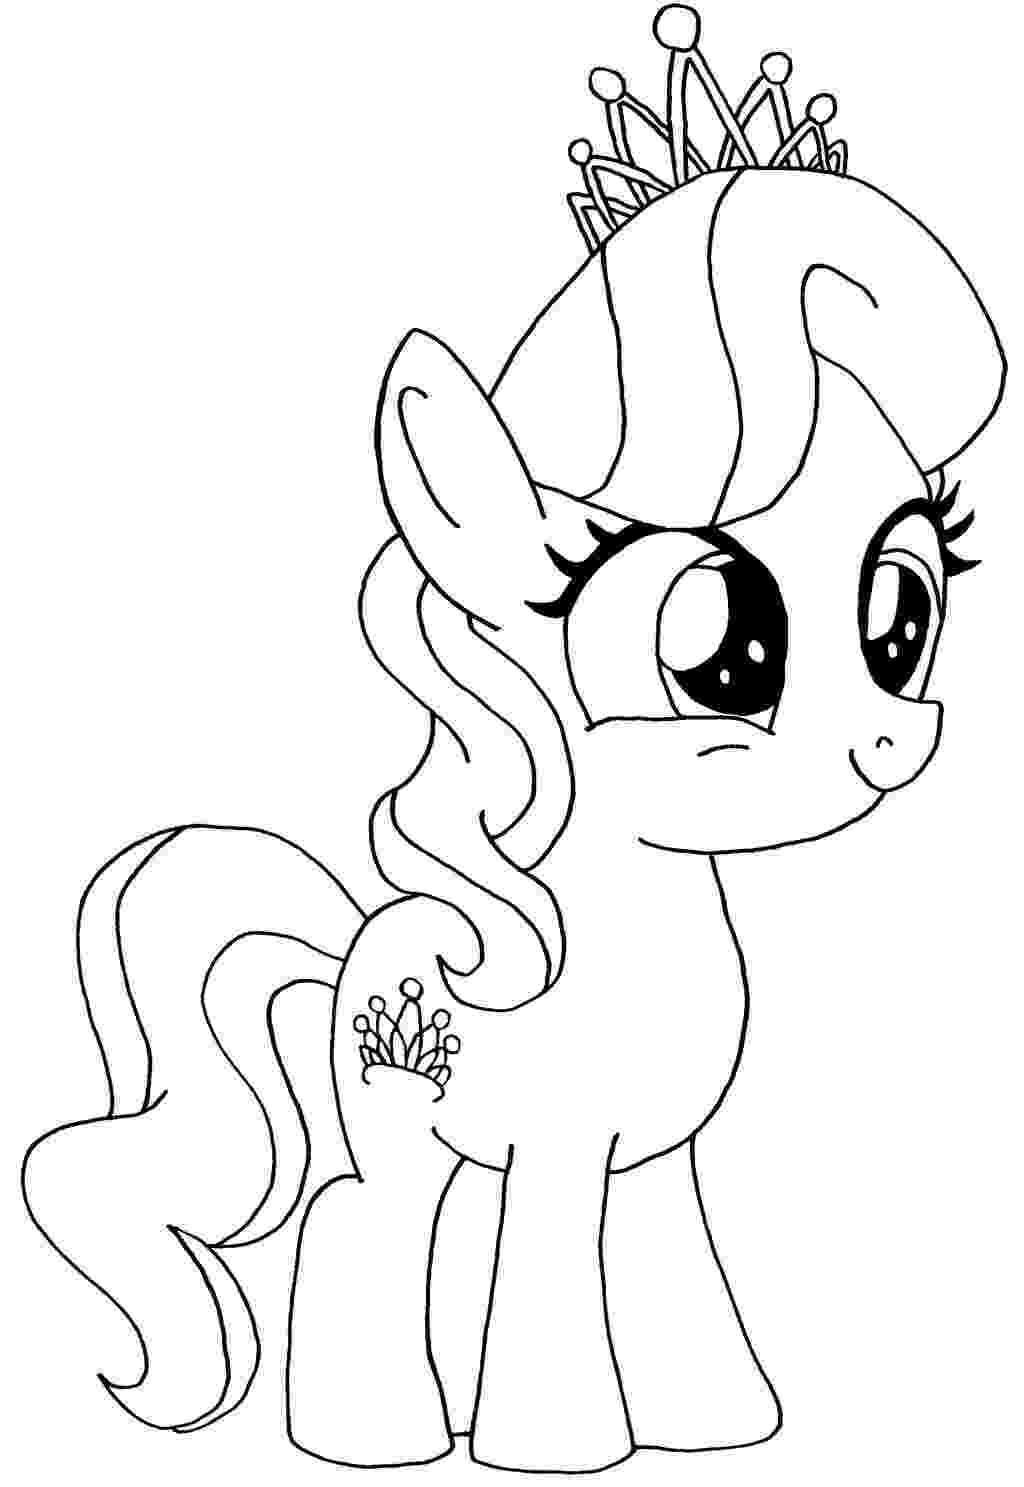 my little pony picters my little pony coloring page coloring home pony my little picters 